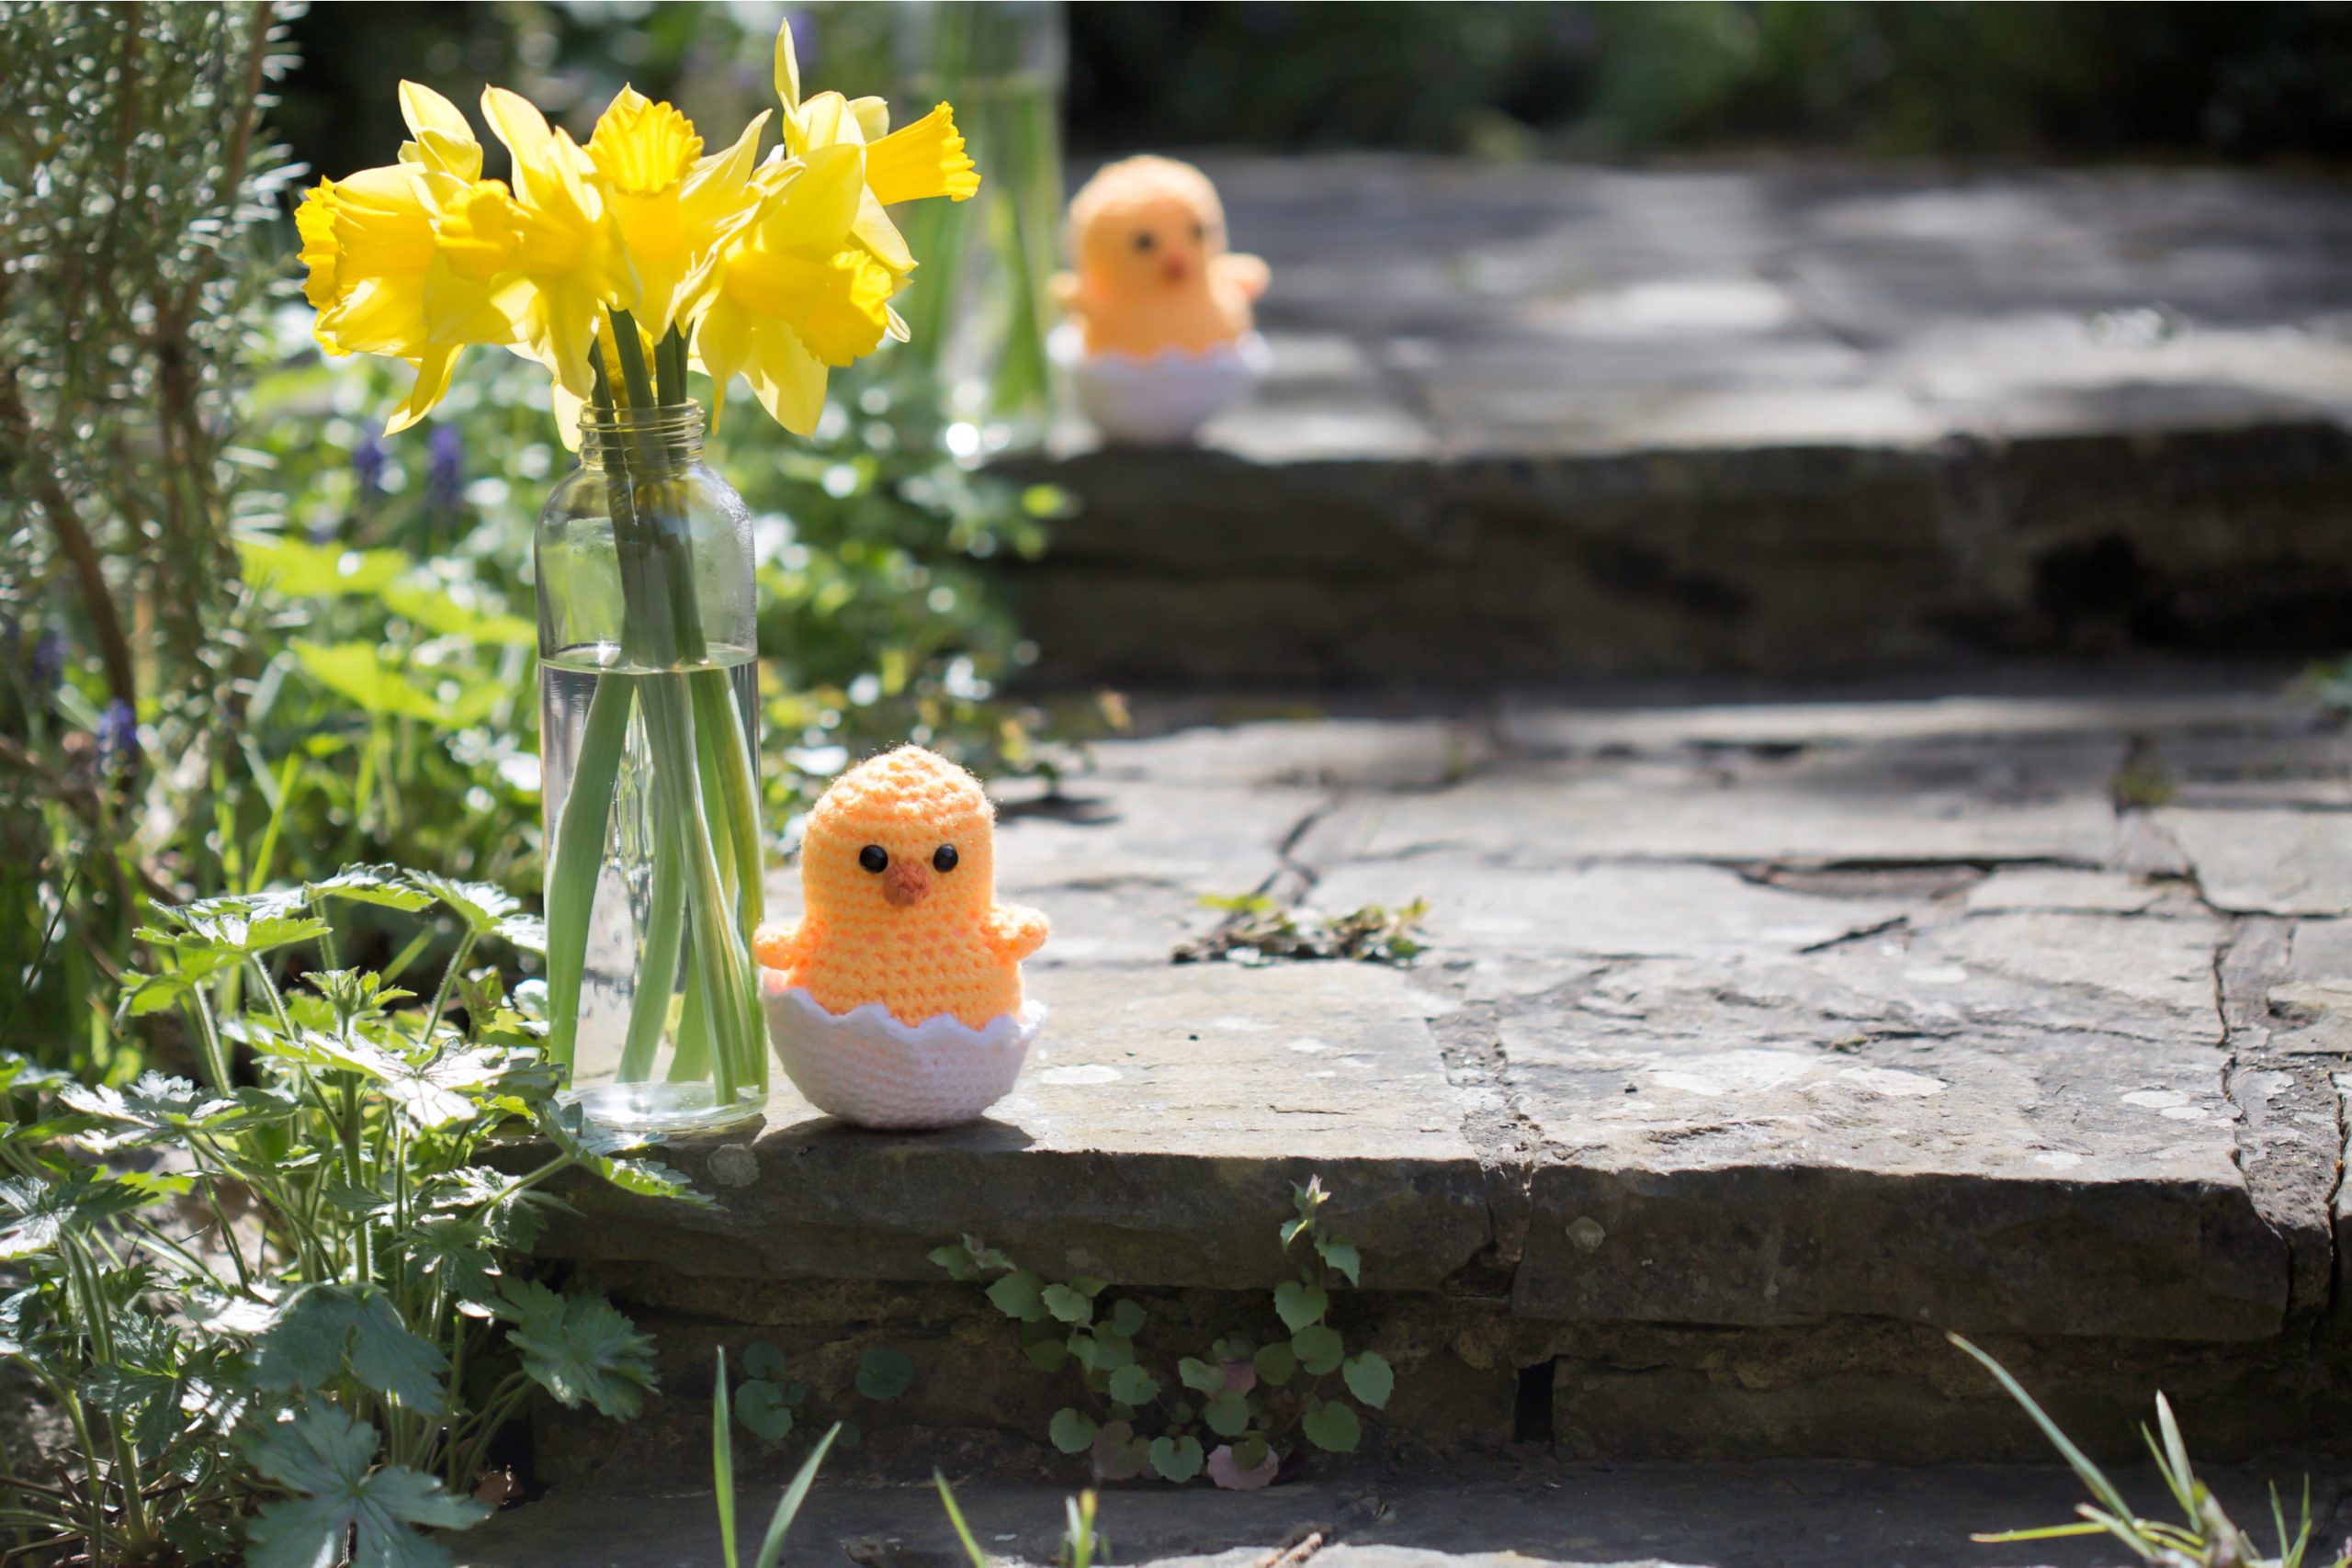 When I stumbled upon an adorable crochet peeps pattern I knew that I absolutely had to share. Keep reading for these super cute (and free!) crochet peeps patterns so you can make your own adorable chicks! 